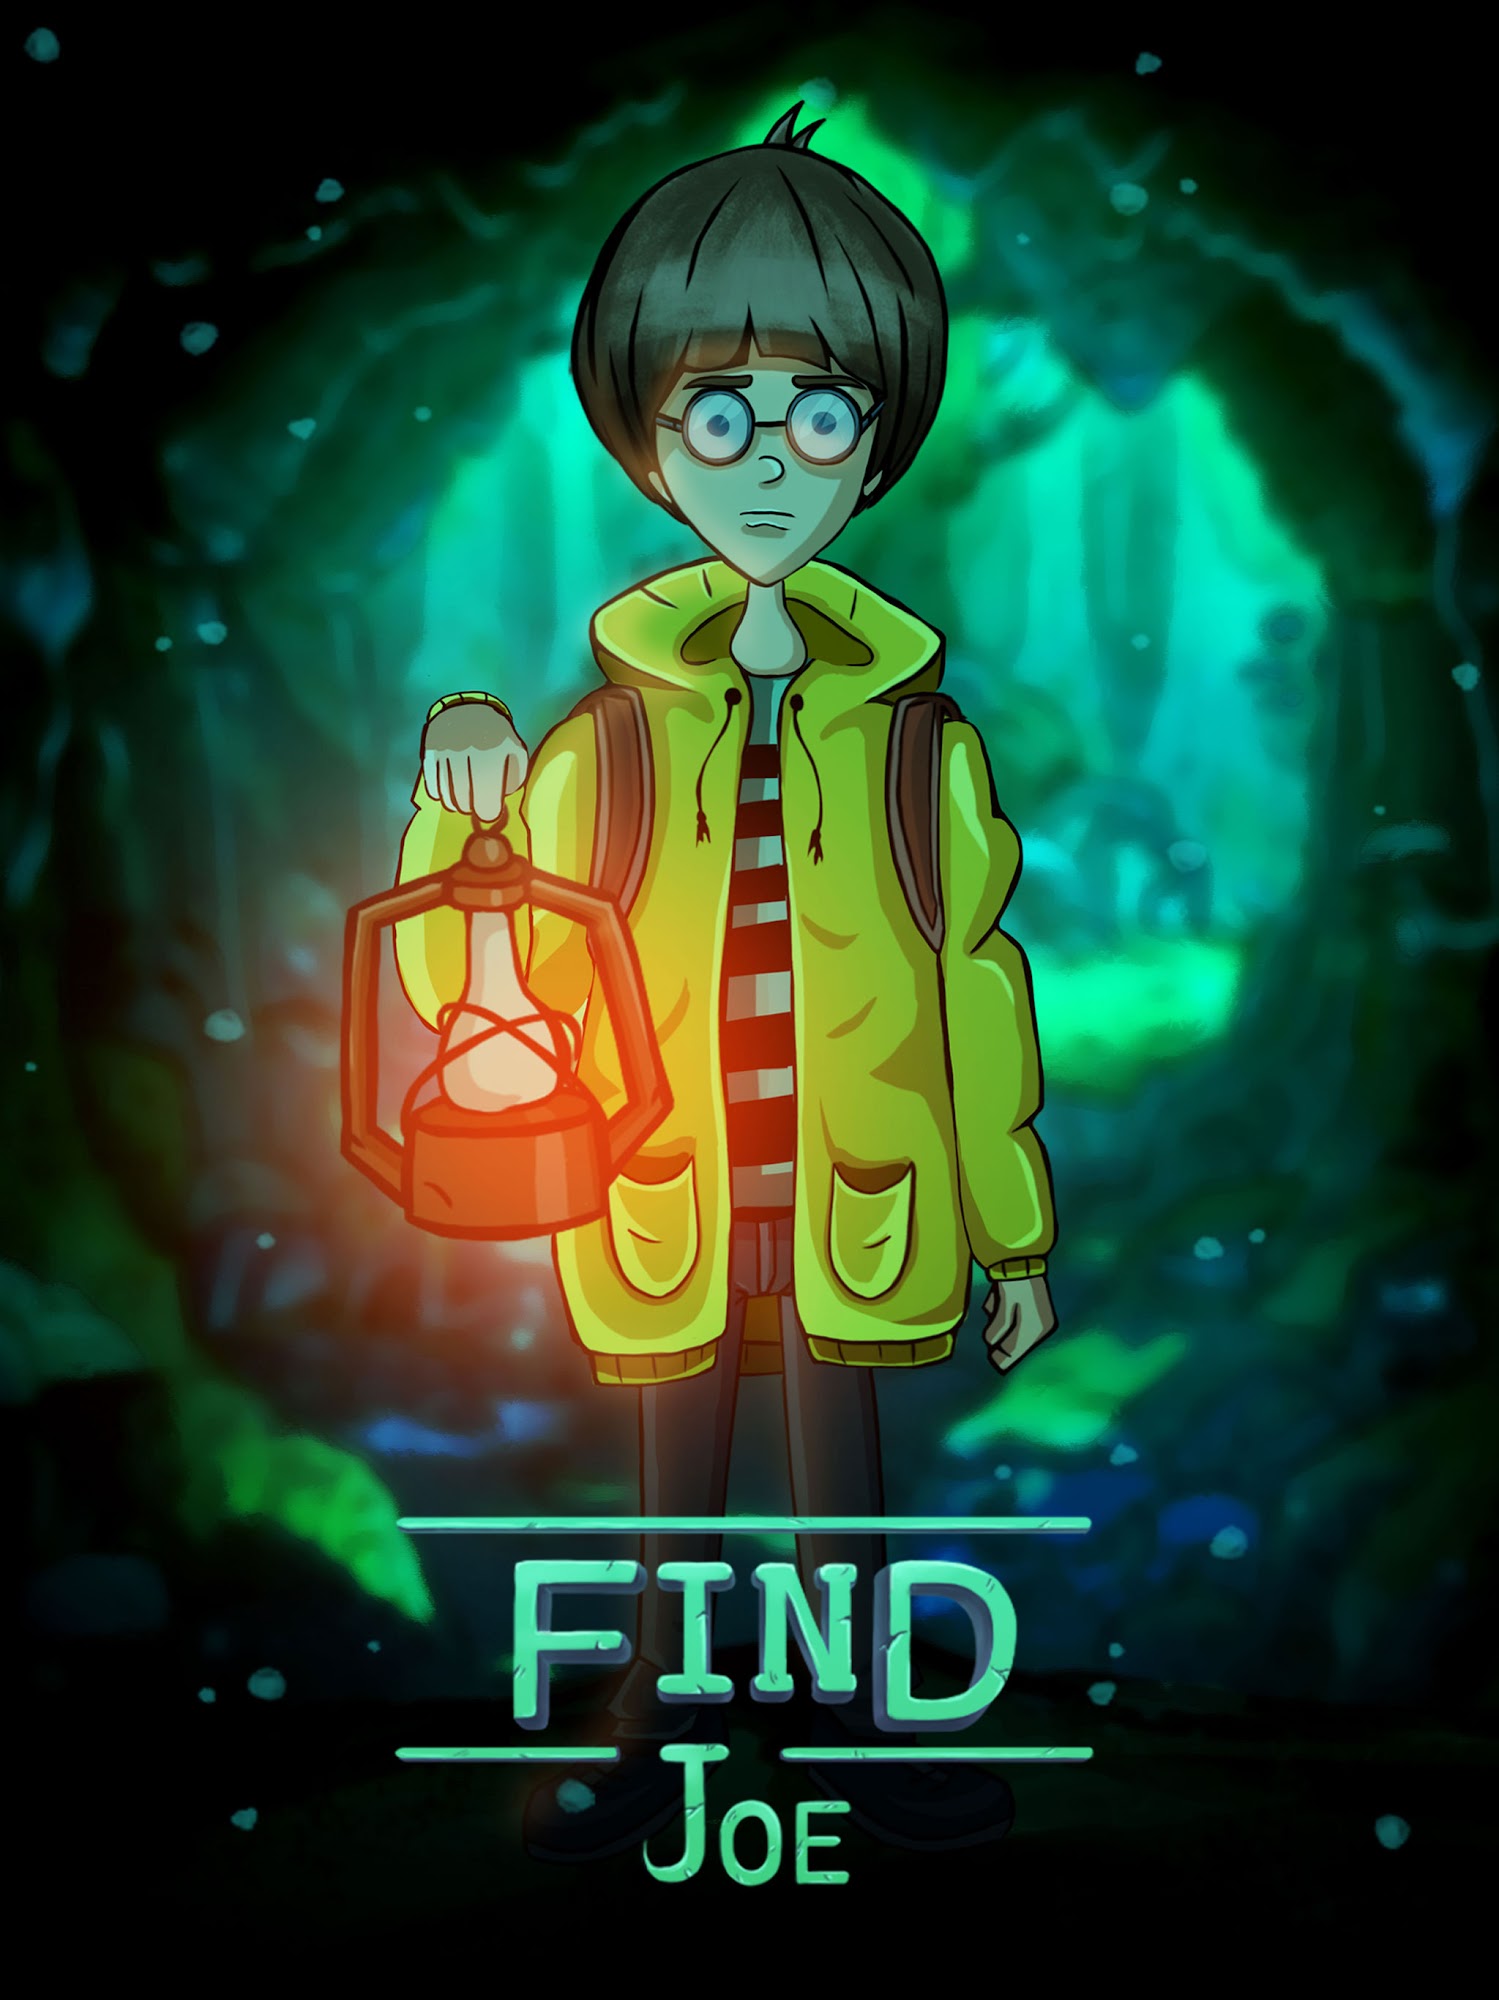 Baixar Find Joe : Unsolved Mystery para Android grátis.